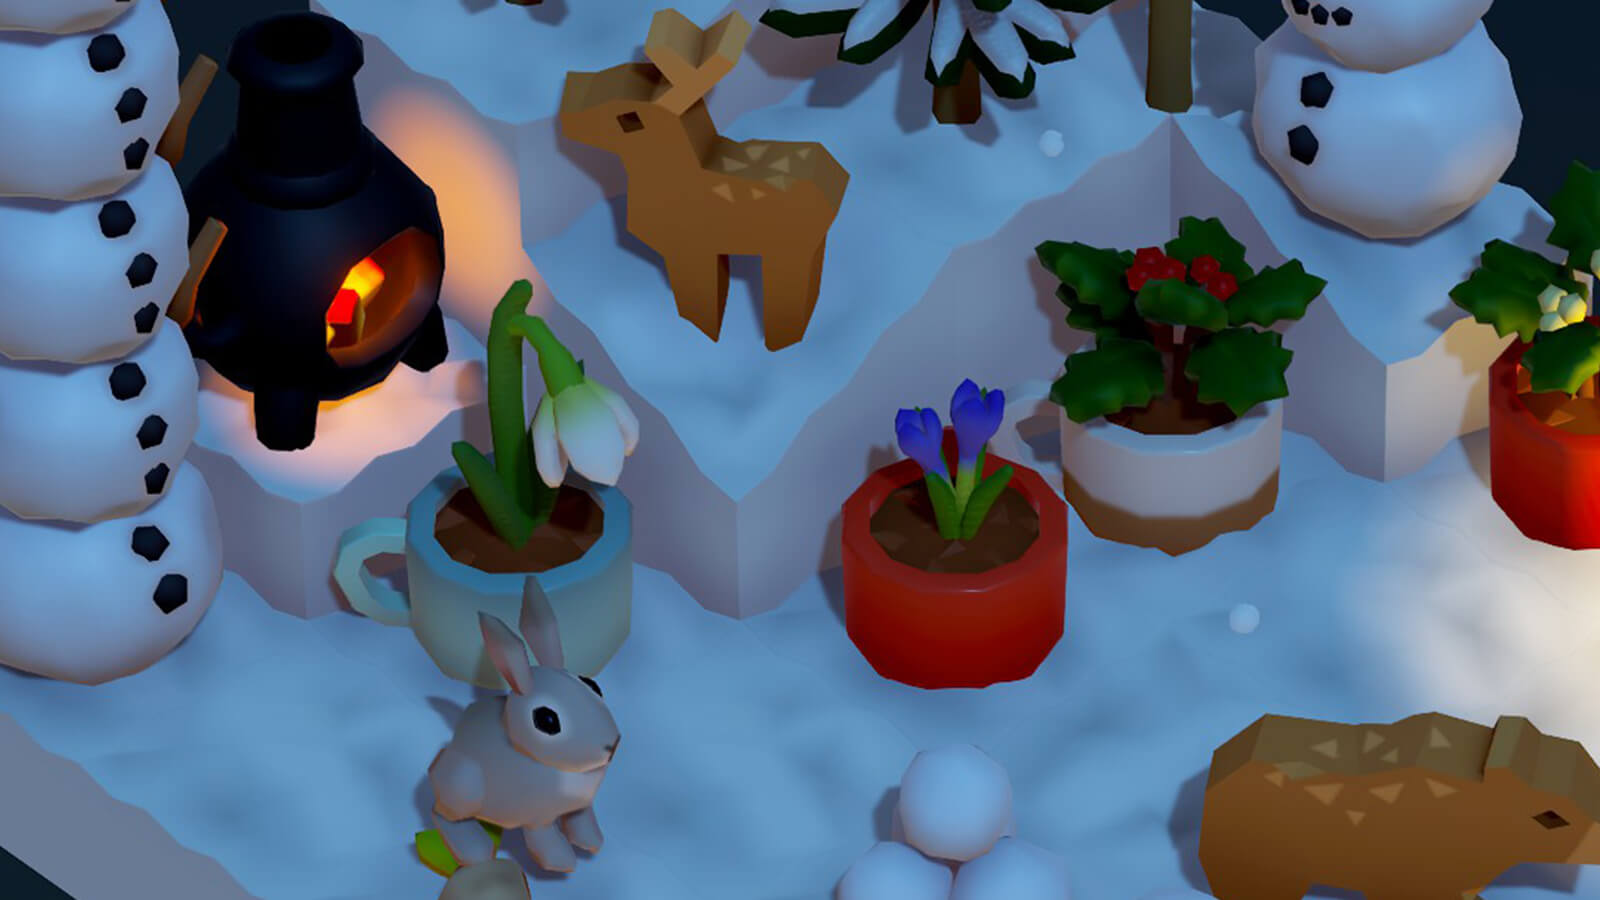 A wintry scene made up of isometric blocks, featuring a bunny, lots of snow, and various plants in teacups.